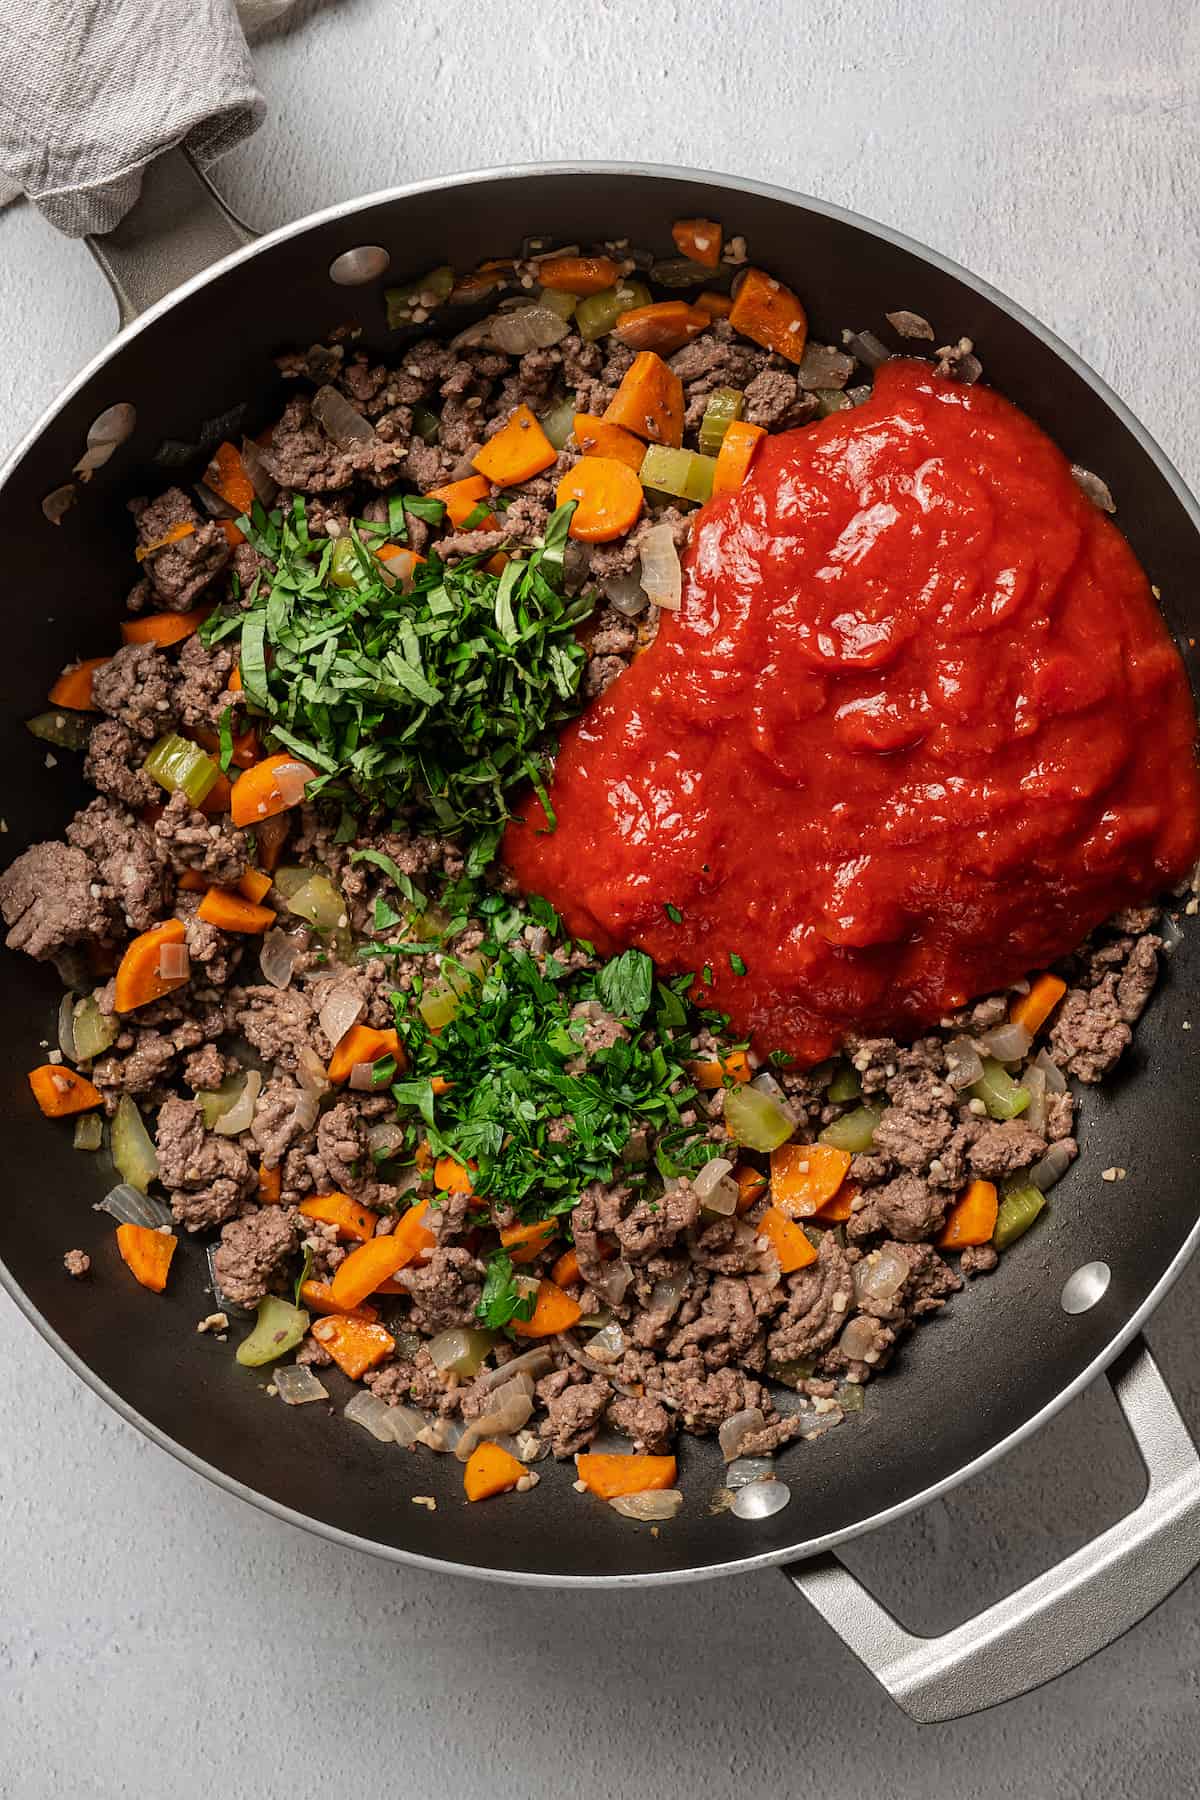 Tomato sauce and other ingredients in a heavy skillet.